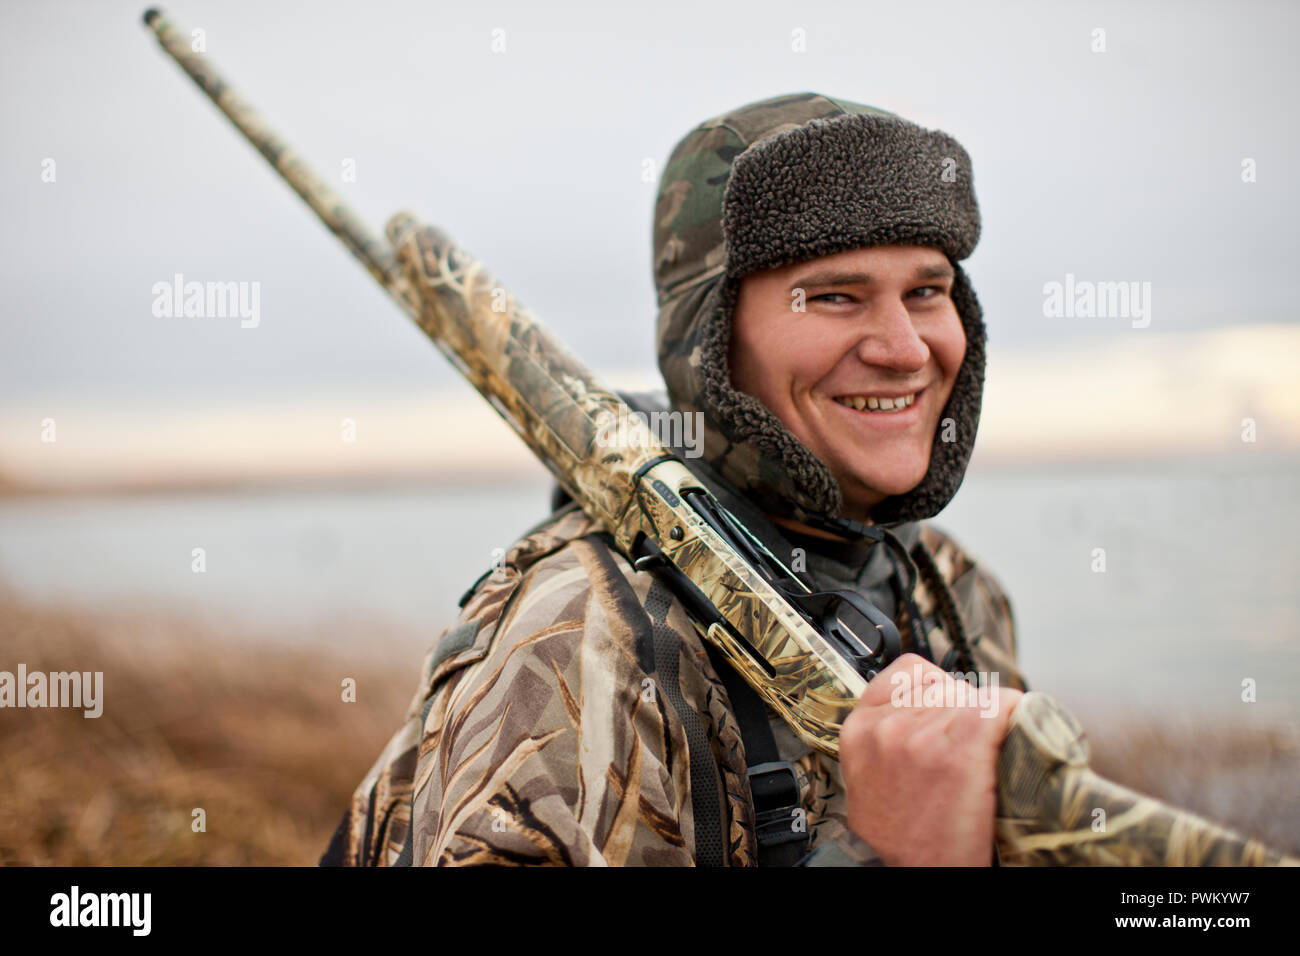 Portrait of a smiling duck hunter holding a shotgun while hunting dressed in camouflage clothing a rural lake. Stock Photo